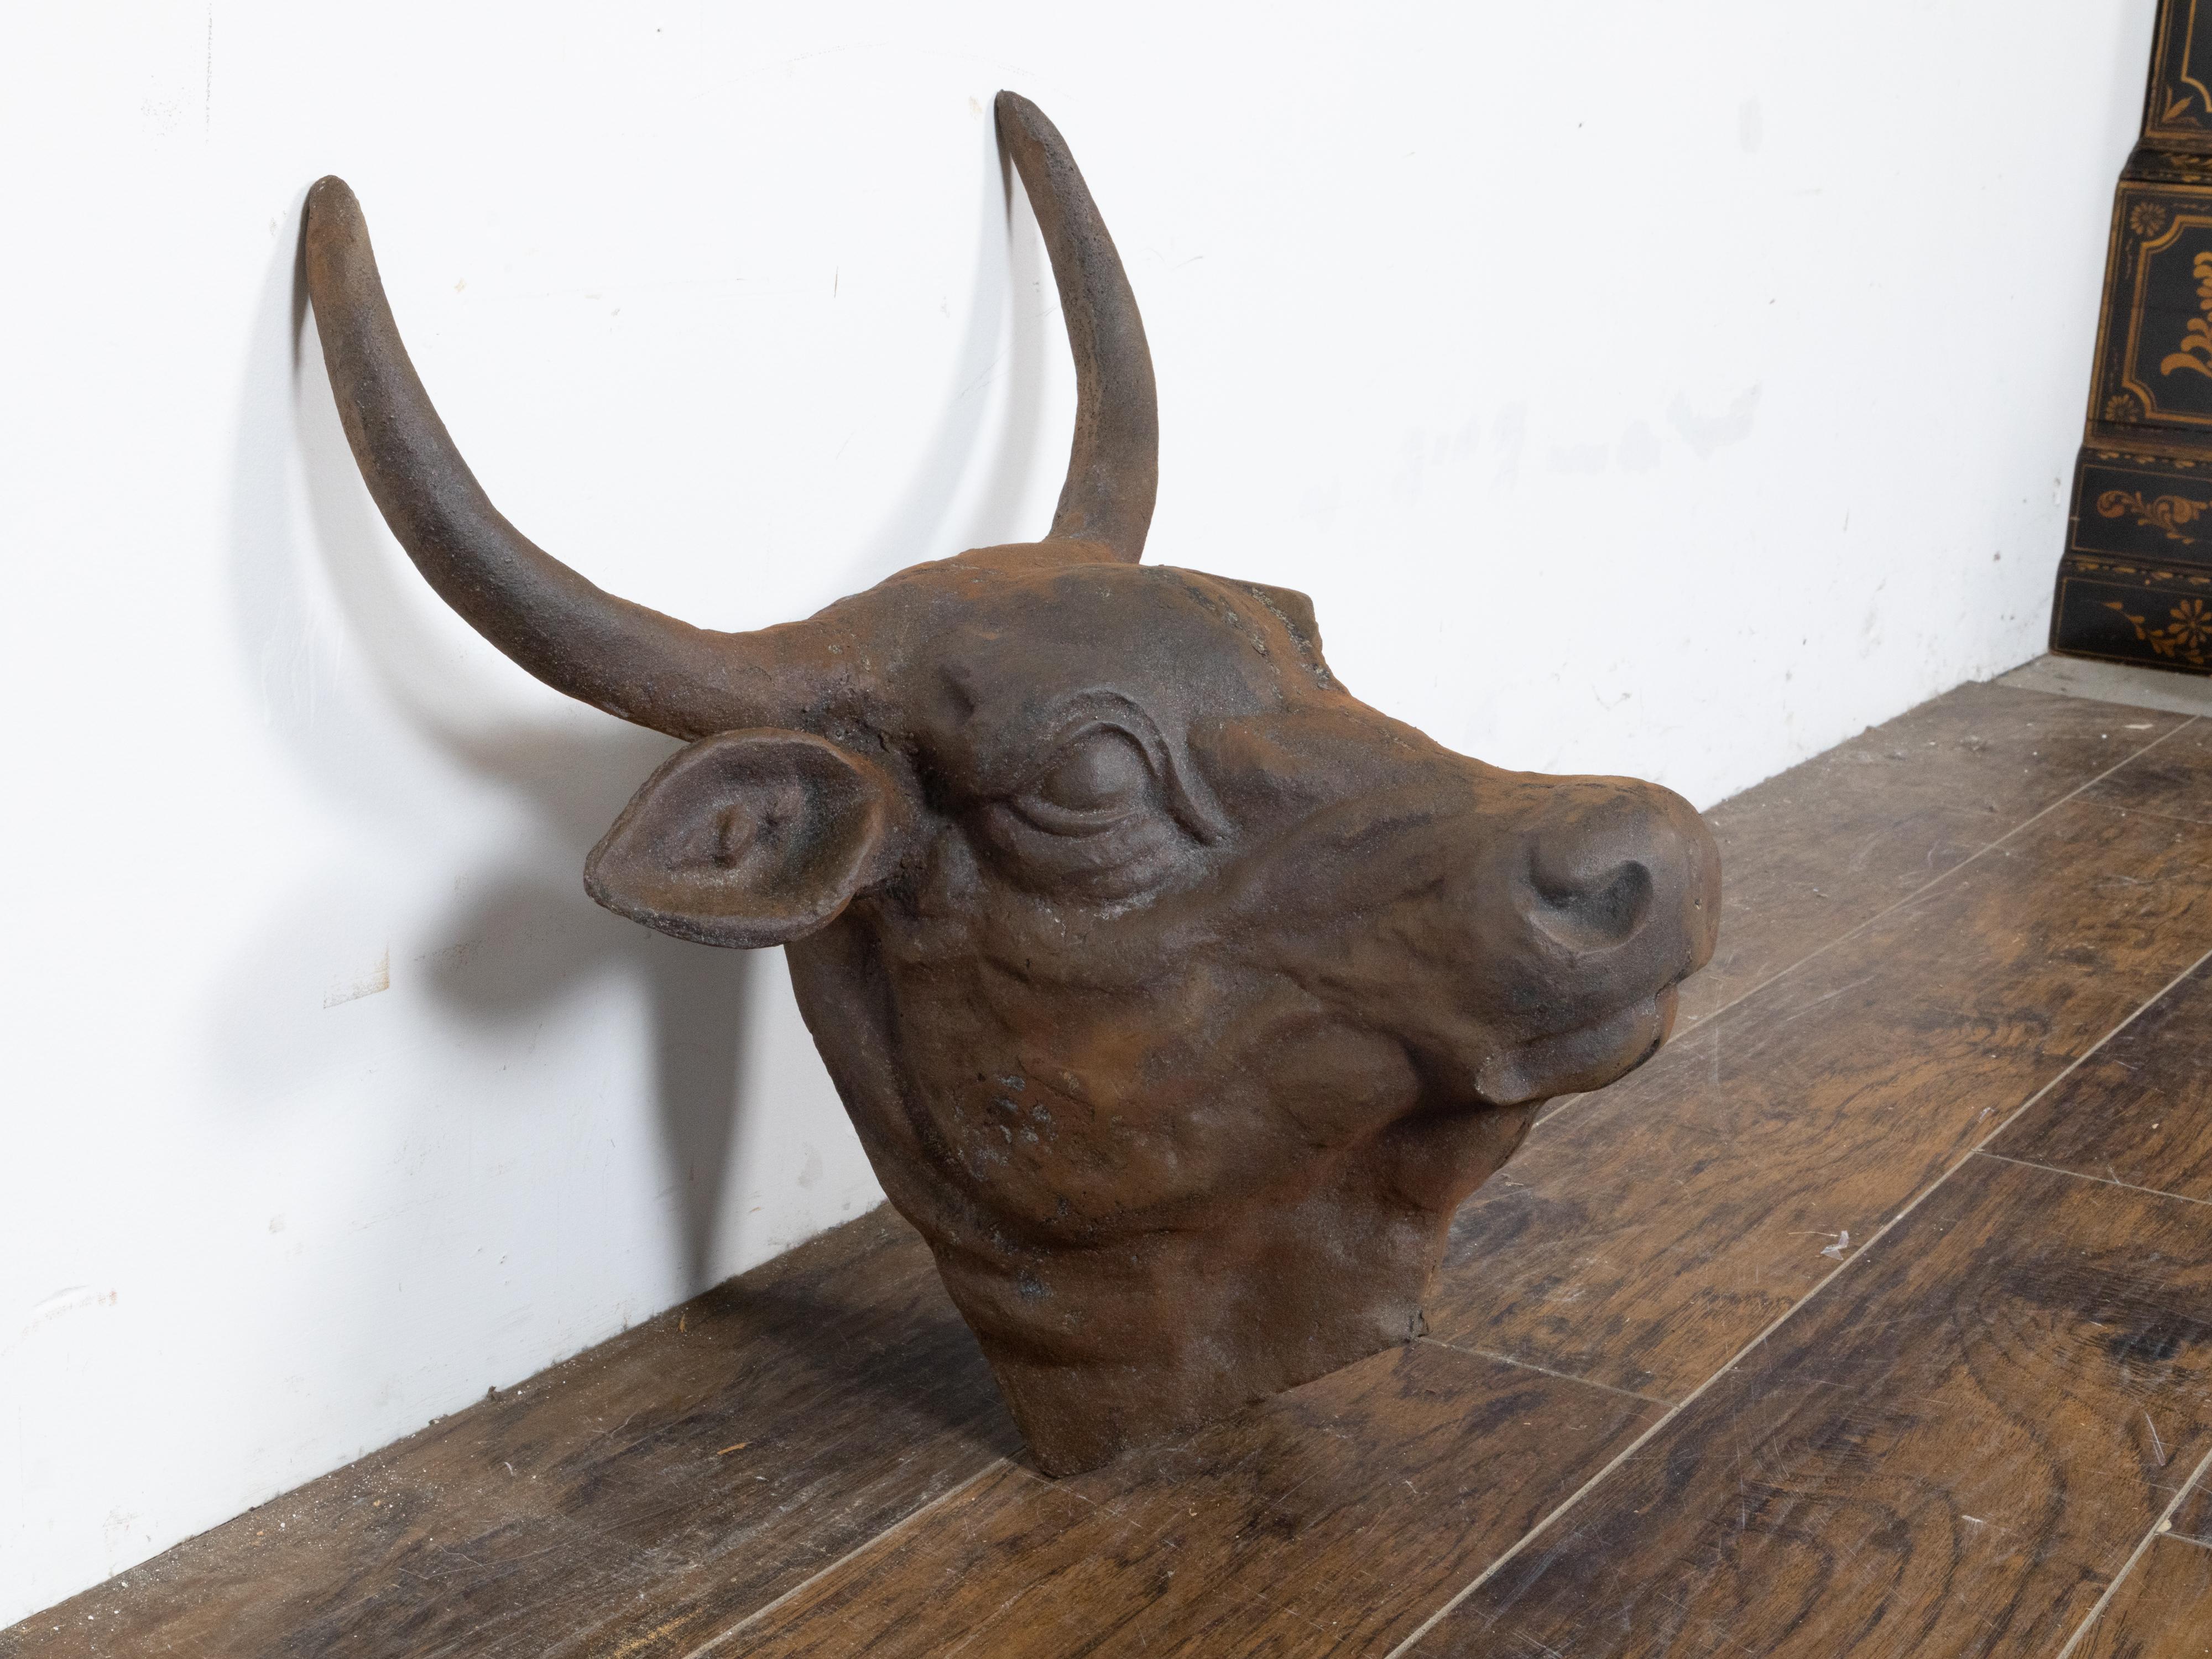 English 1930s-1940s Cast Iron Bull Wall Hanging Sculpture with Rusty Patina For Sale 4